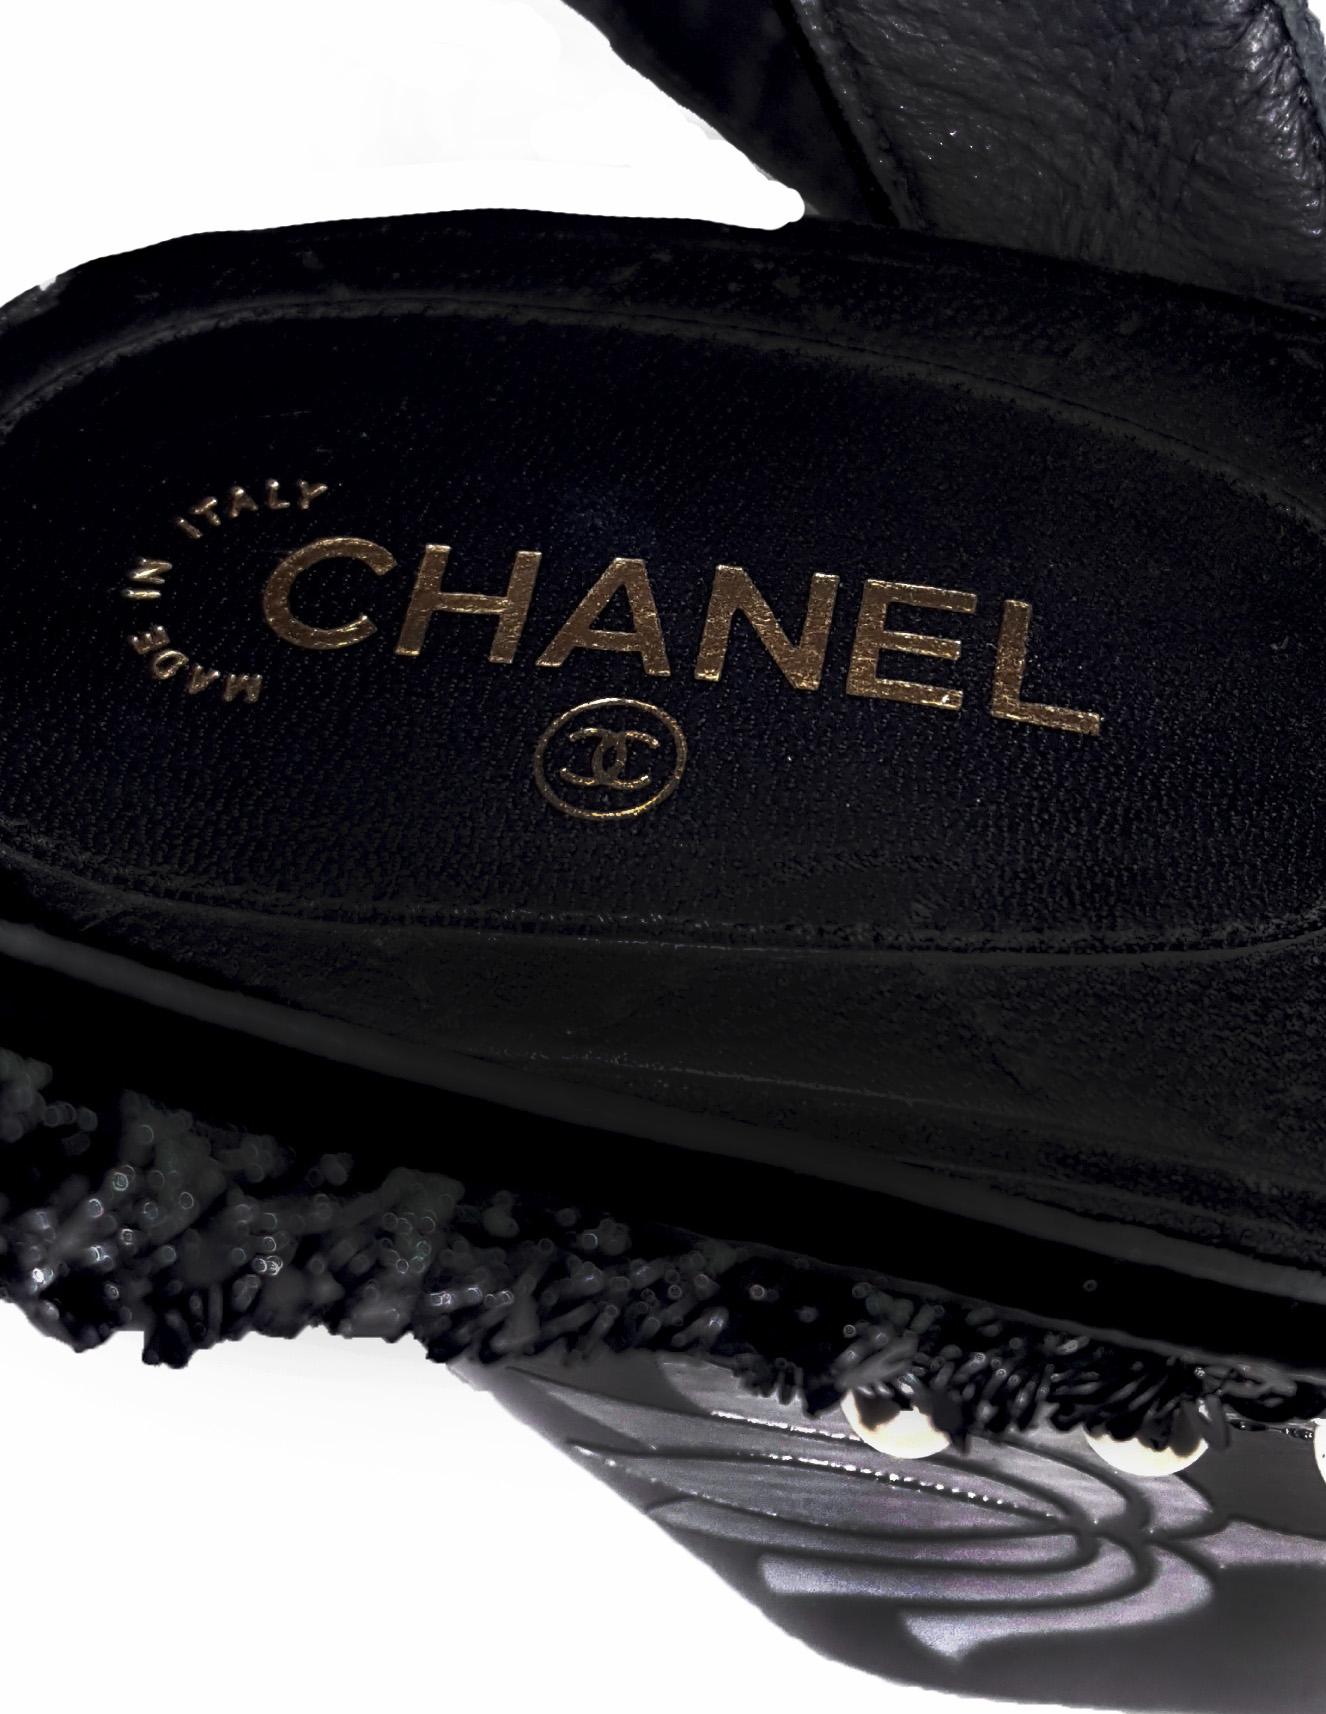 Women's Chanel Wedge Black Sandals W/ Faux Mother of Pearl Flower & Sequin Straps For Sale